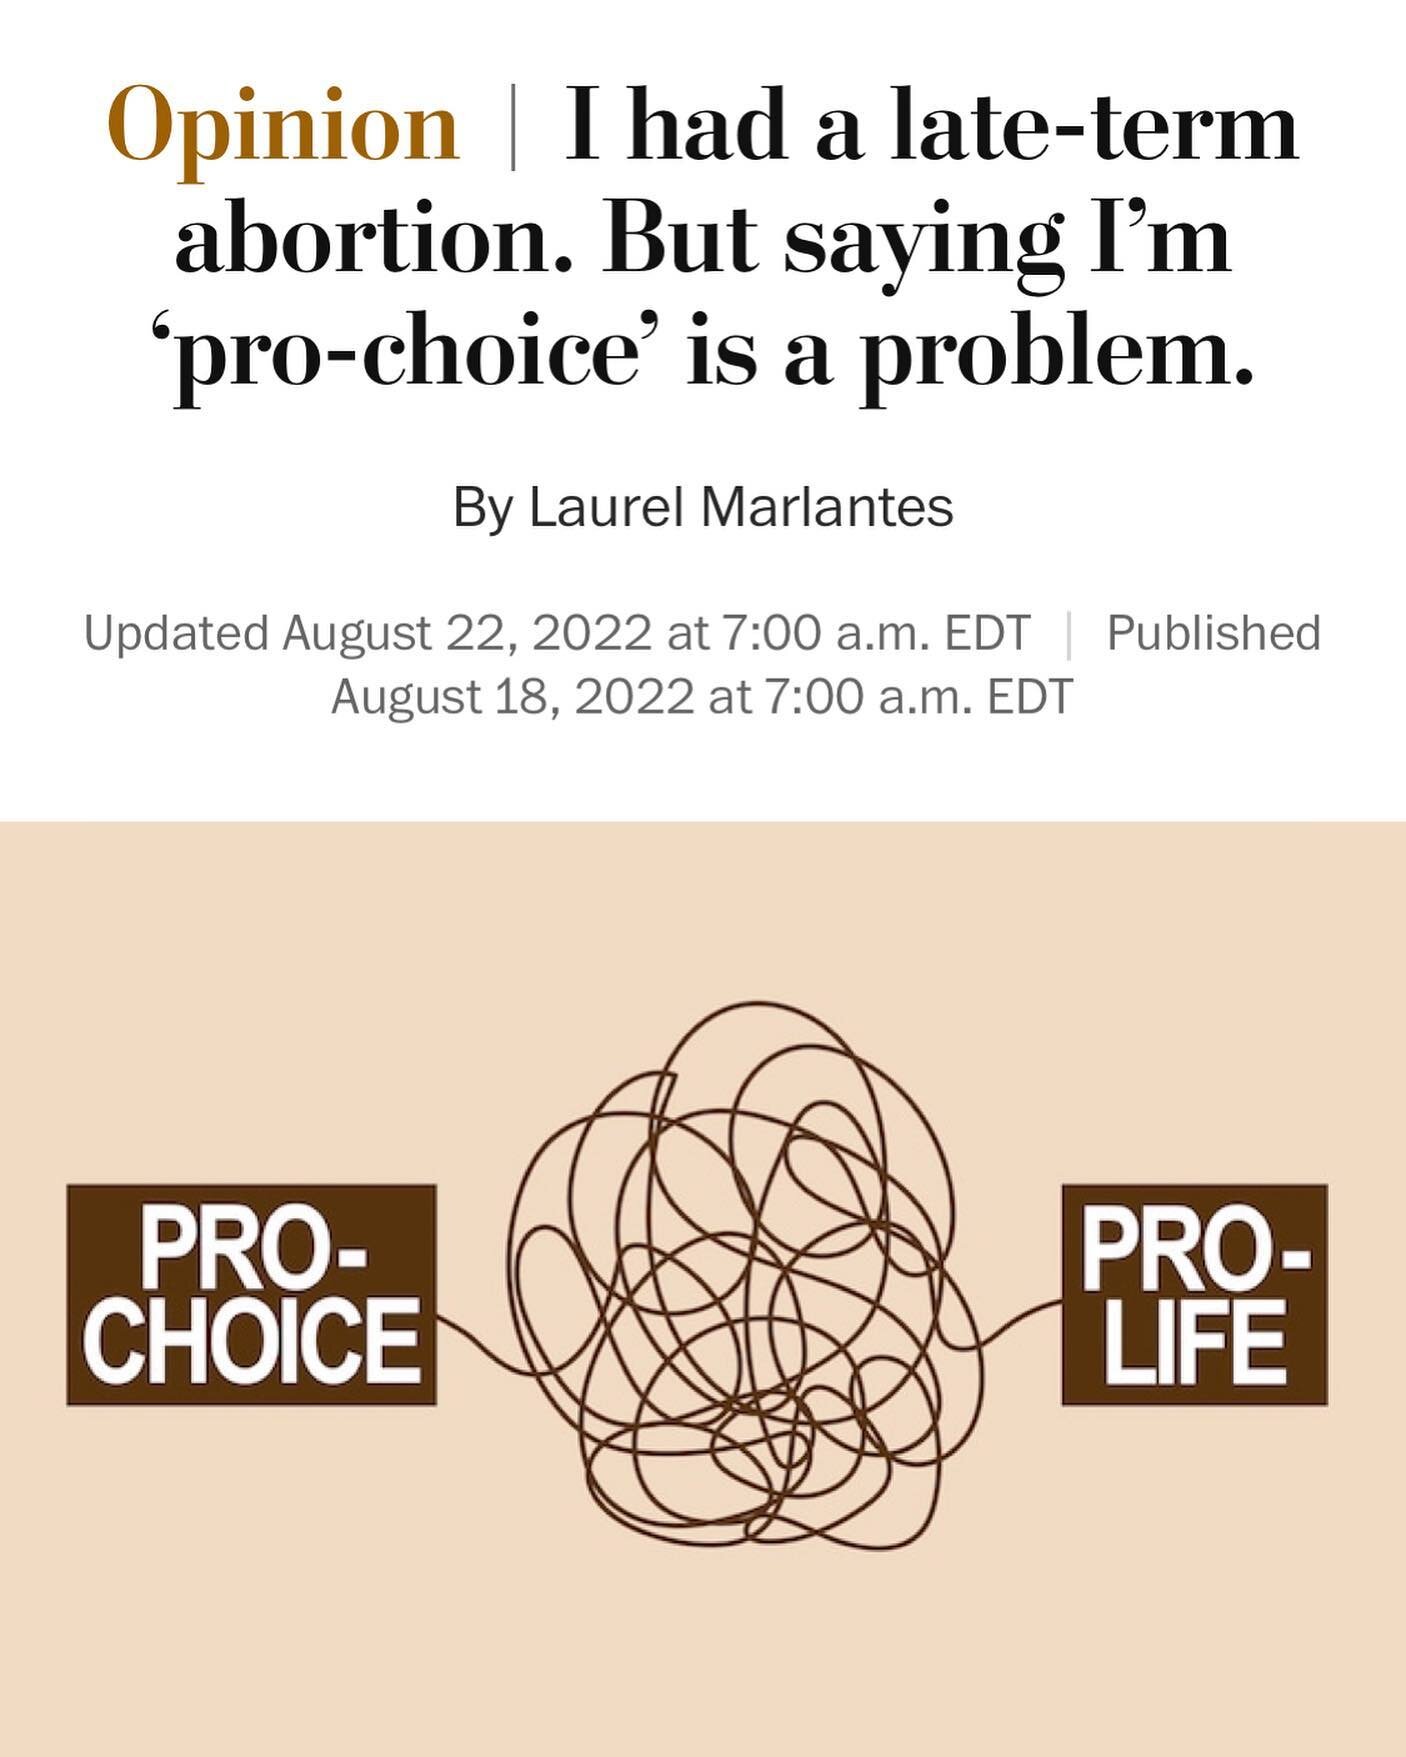 An OpEd I wrote is in the Washington Post this morning! Feeling all the feels about this &ldquo;being out there&rdquo;. But mostly grateful to @washingtonpost for giving my story and experience voice. 🙏🏻❤️ ⁣Thank you!
⁣
Abortion is so personal and 